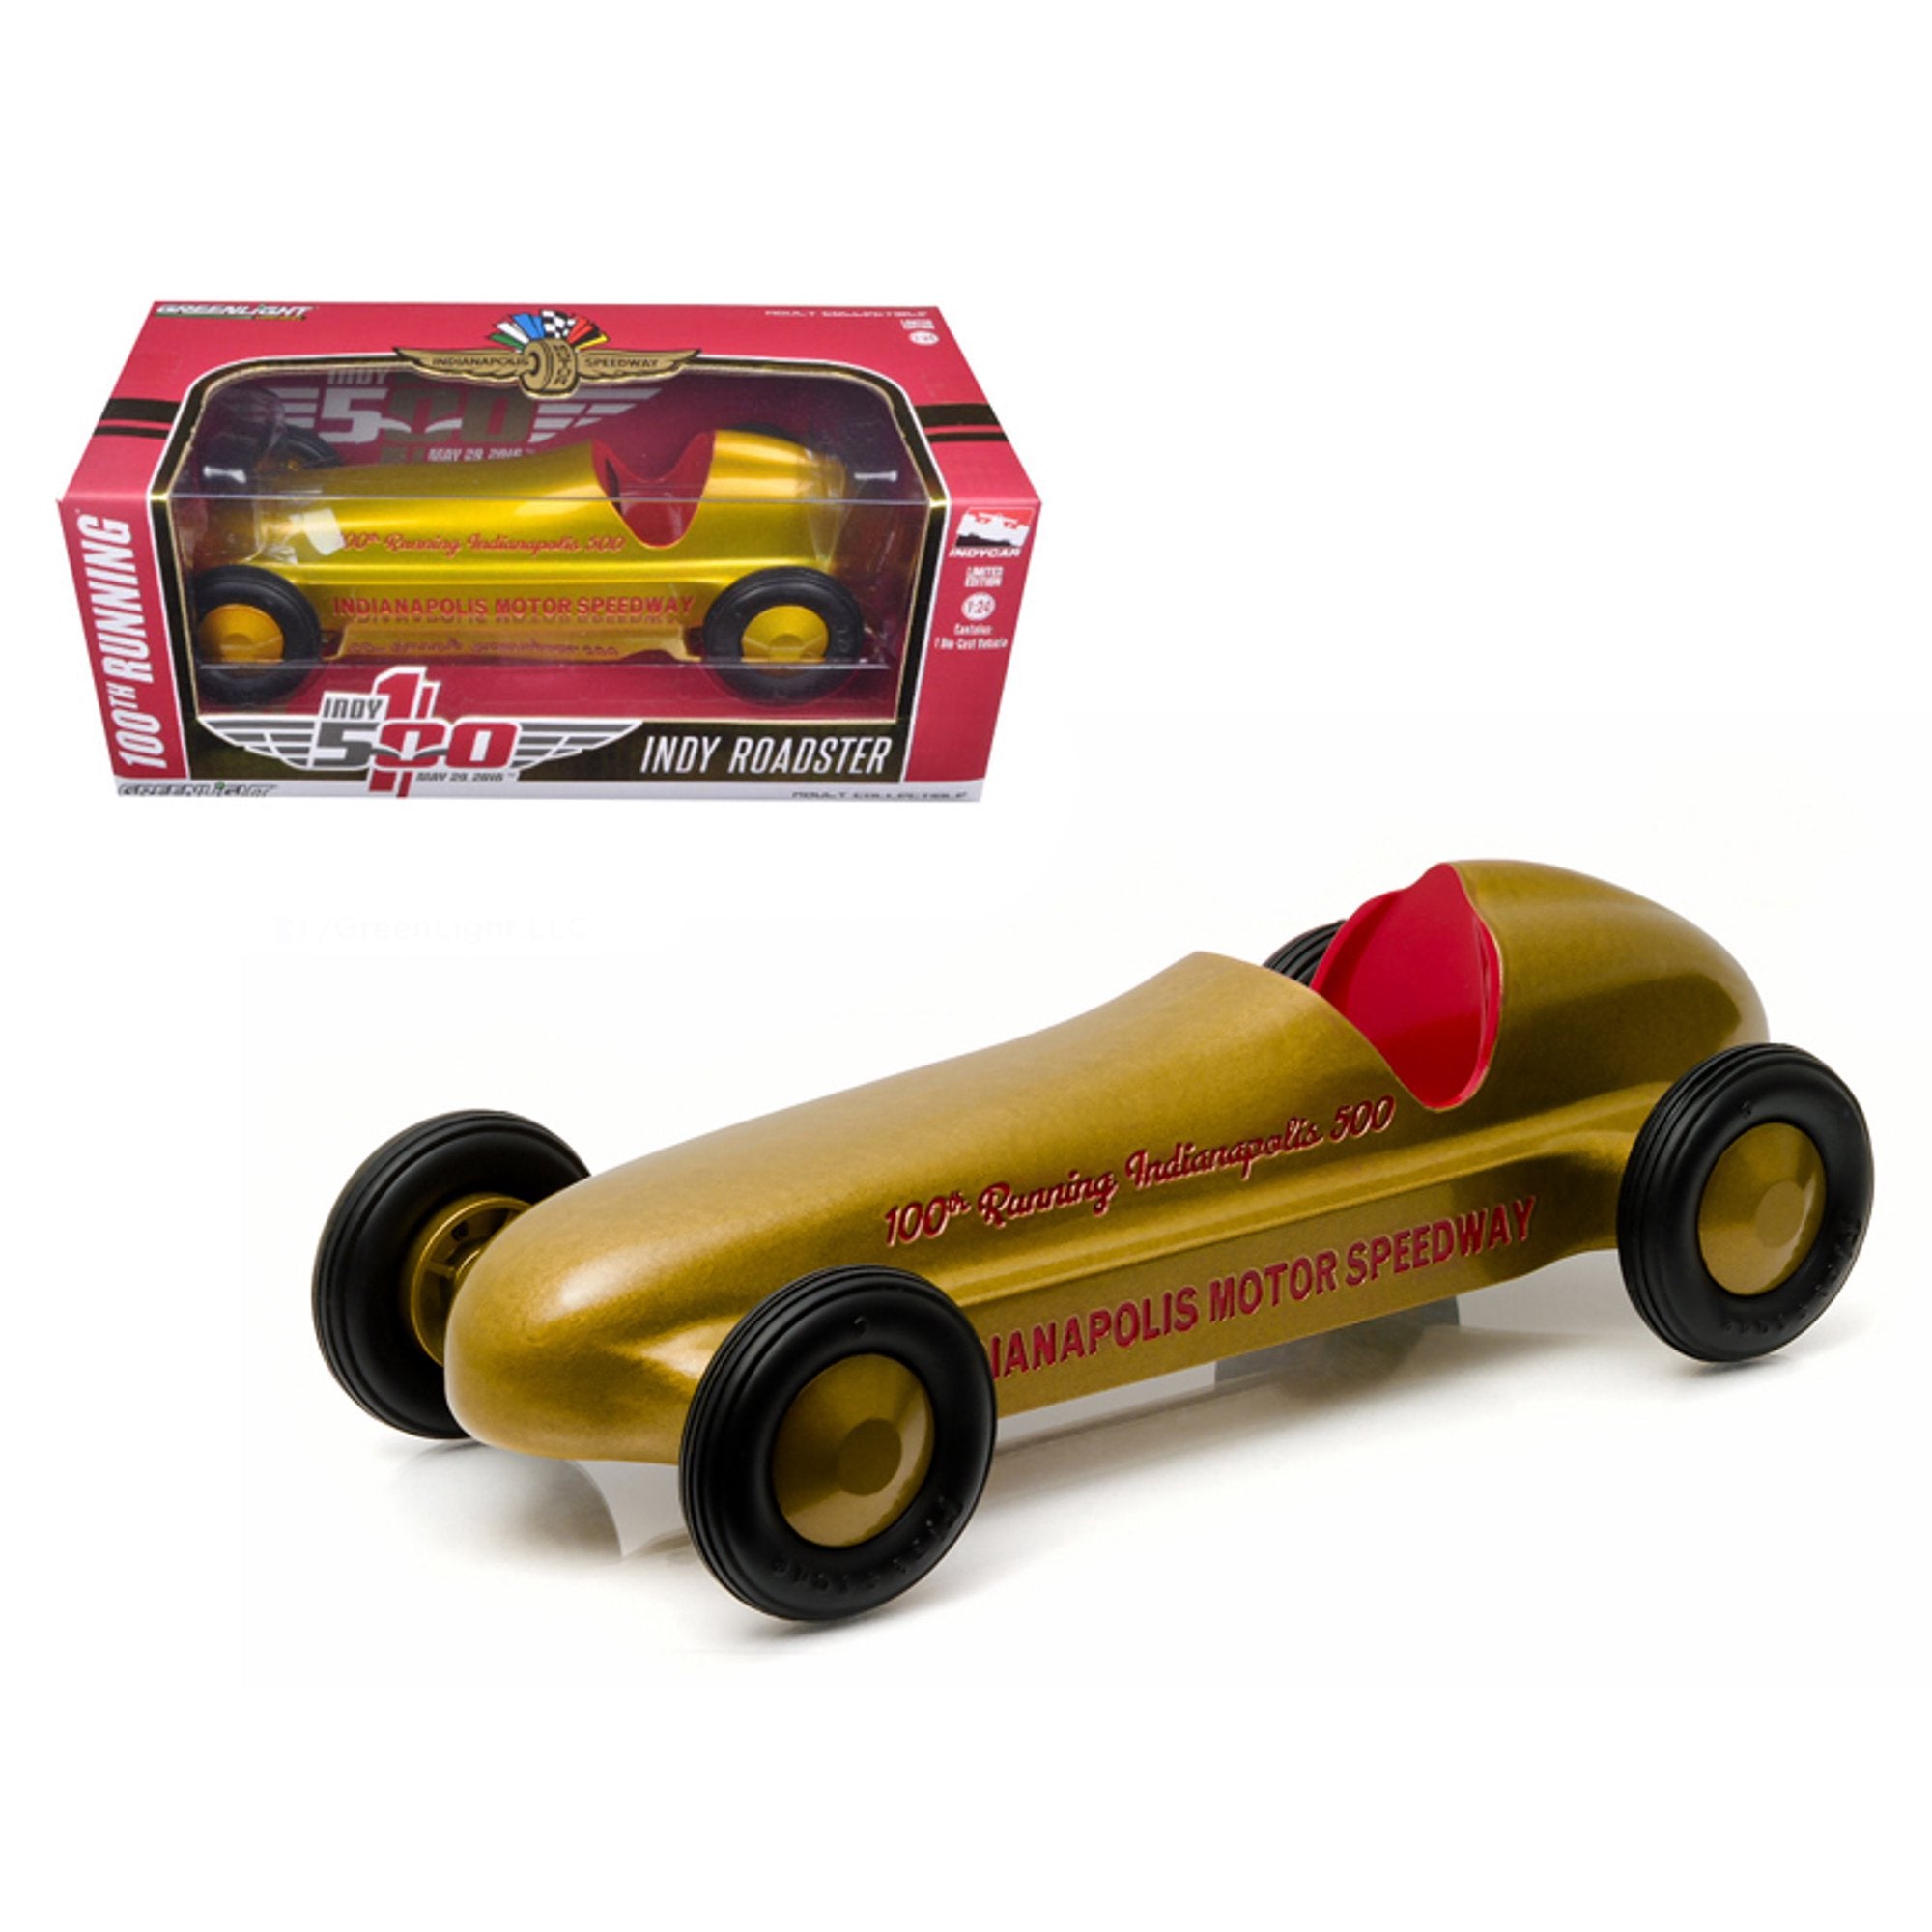 1/24 Vintage Indy Roadster - 100th Running of the Indianapolis 500 Special Gold Edition